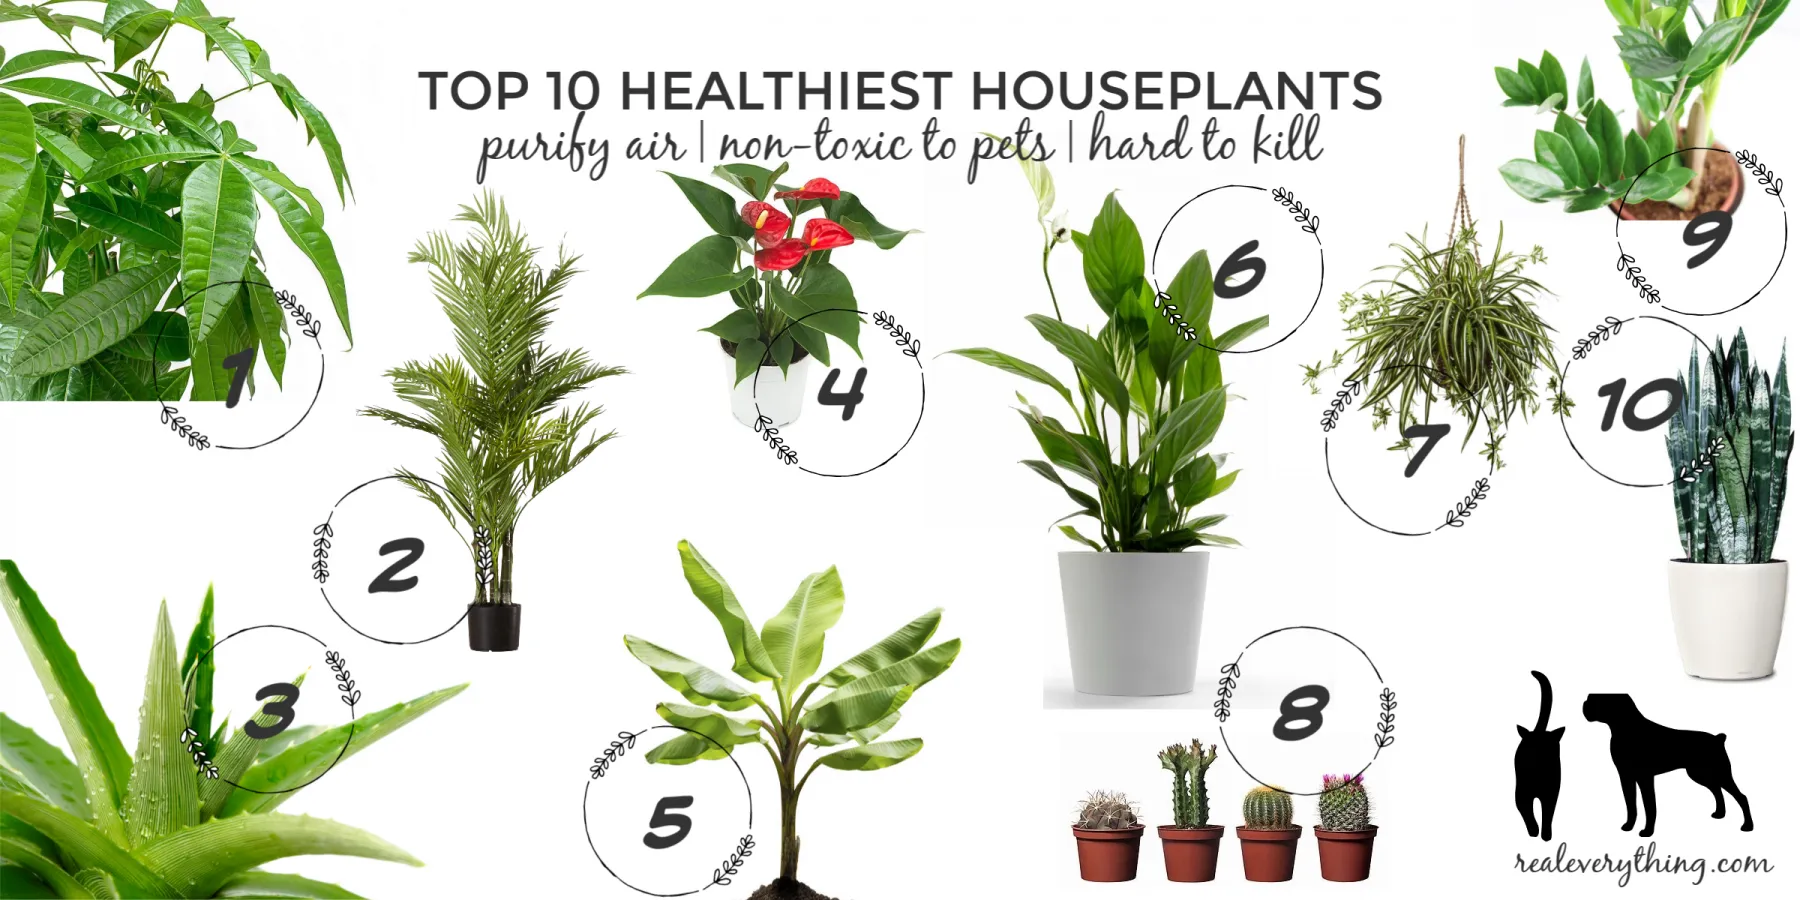 Non-Toxic Houseplants That Are Safe for Kids & Pets